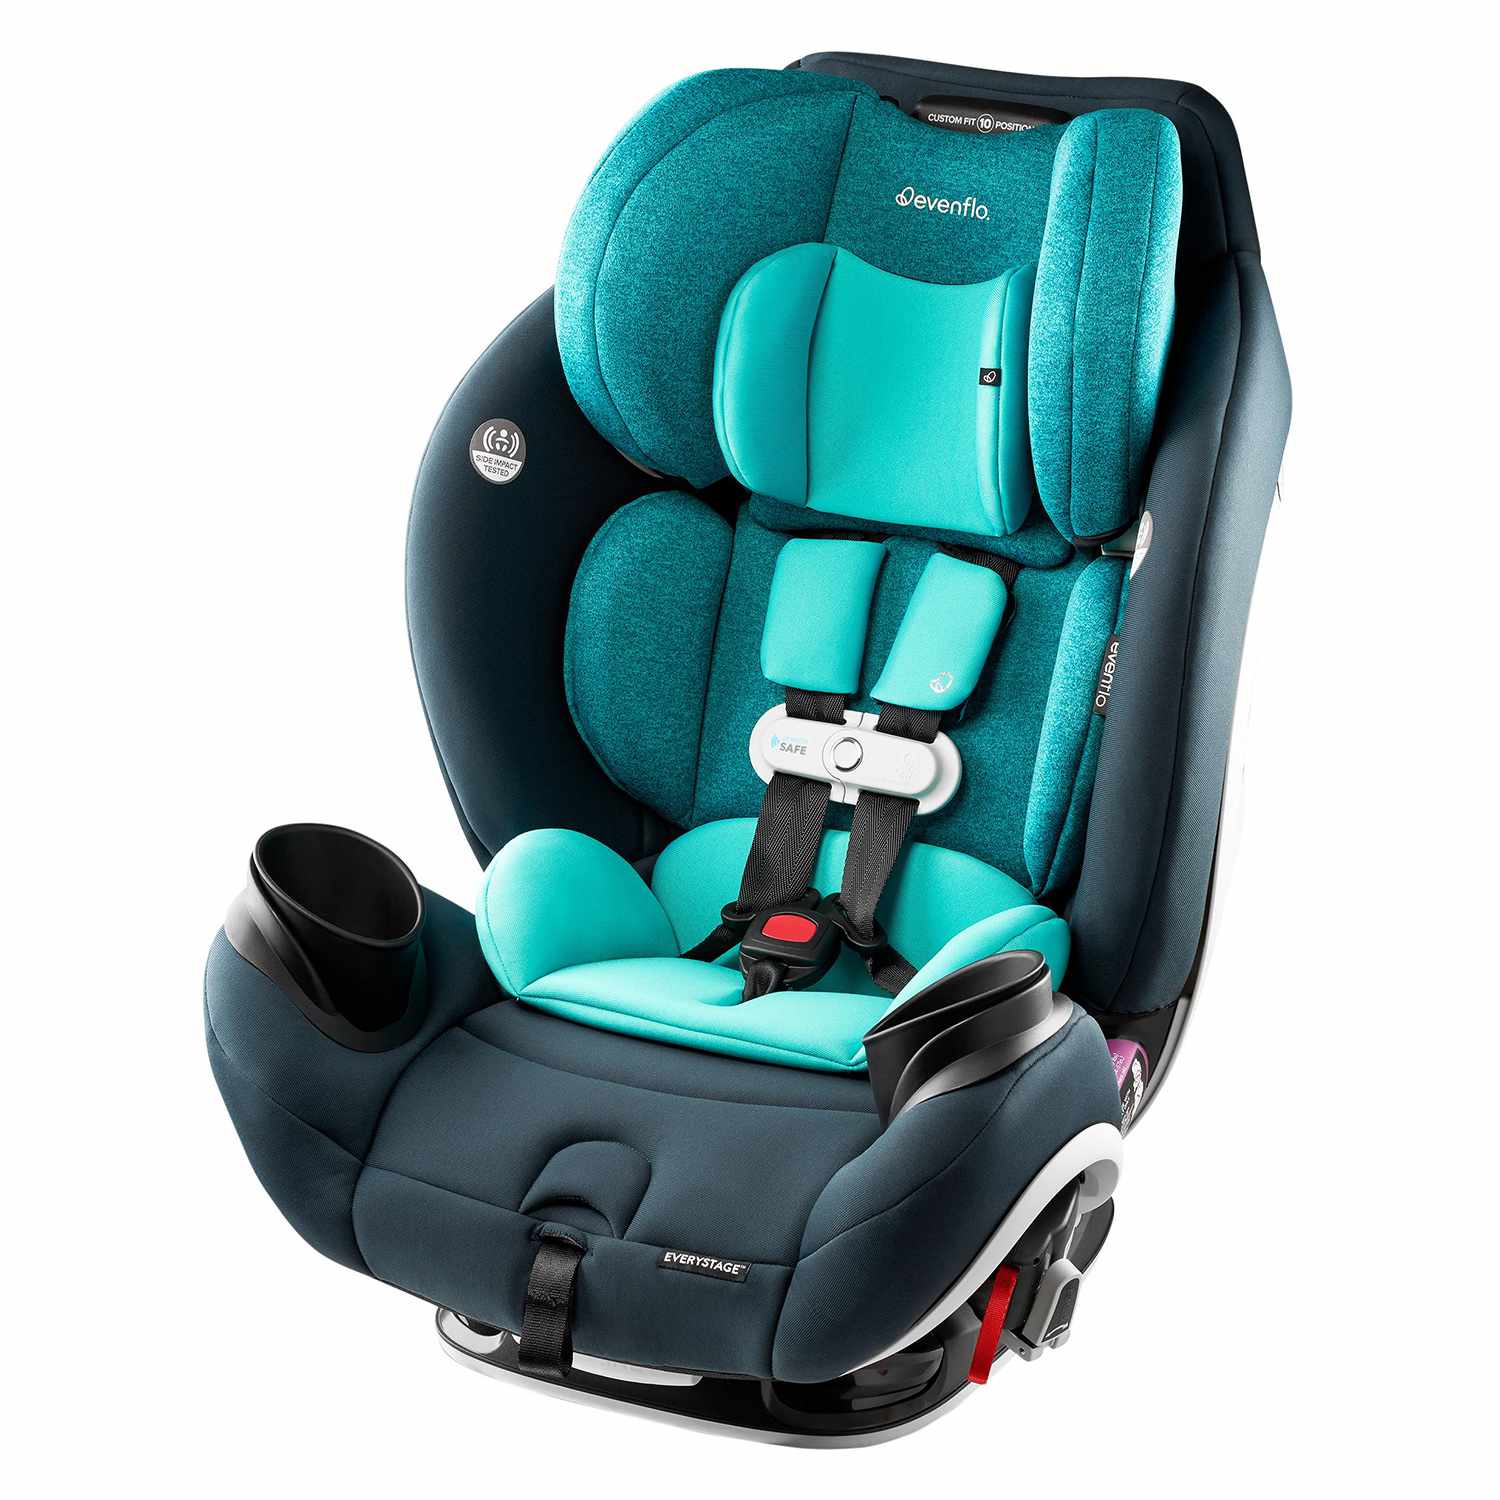 Best Deal: Evenflo EveryStage Car Seat